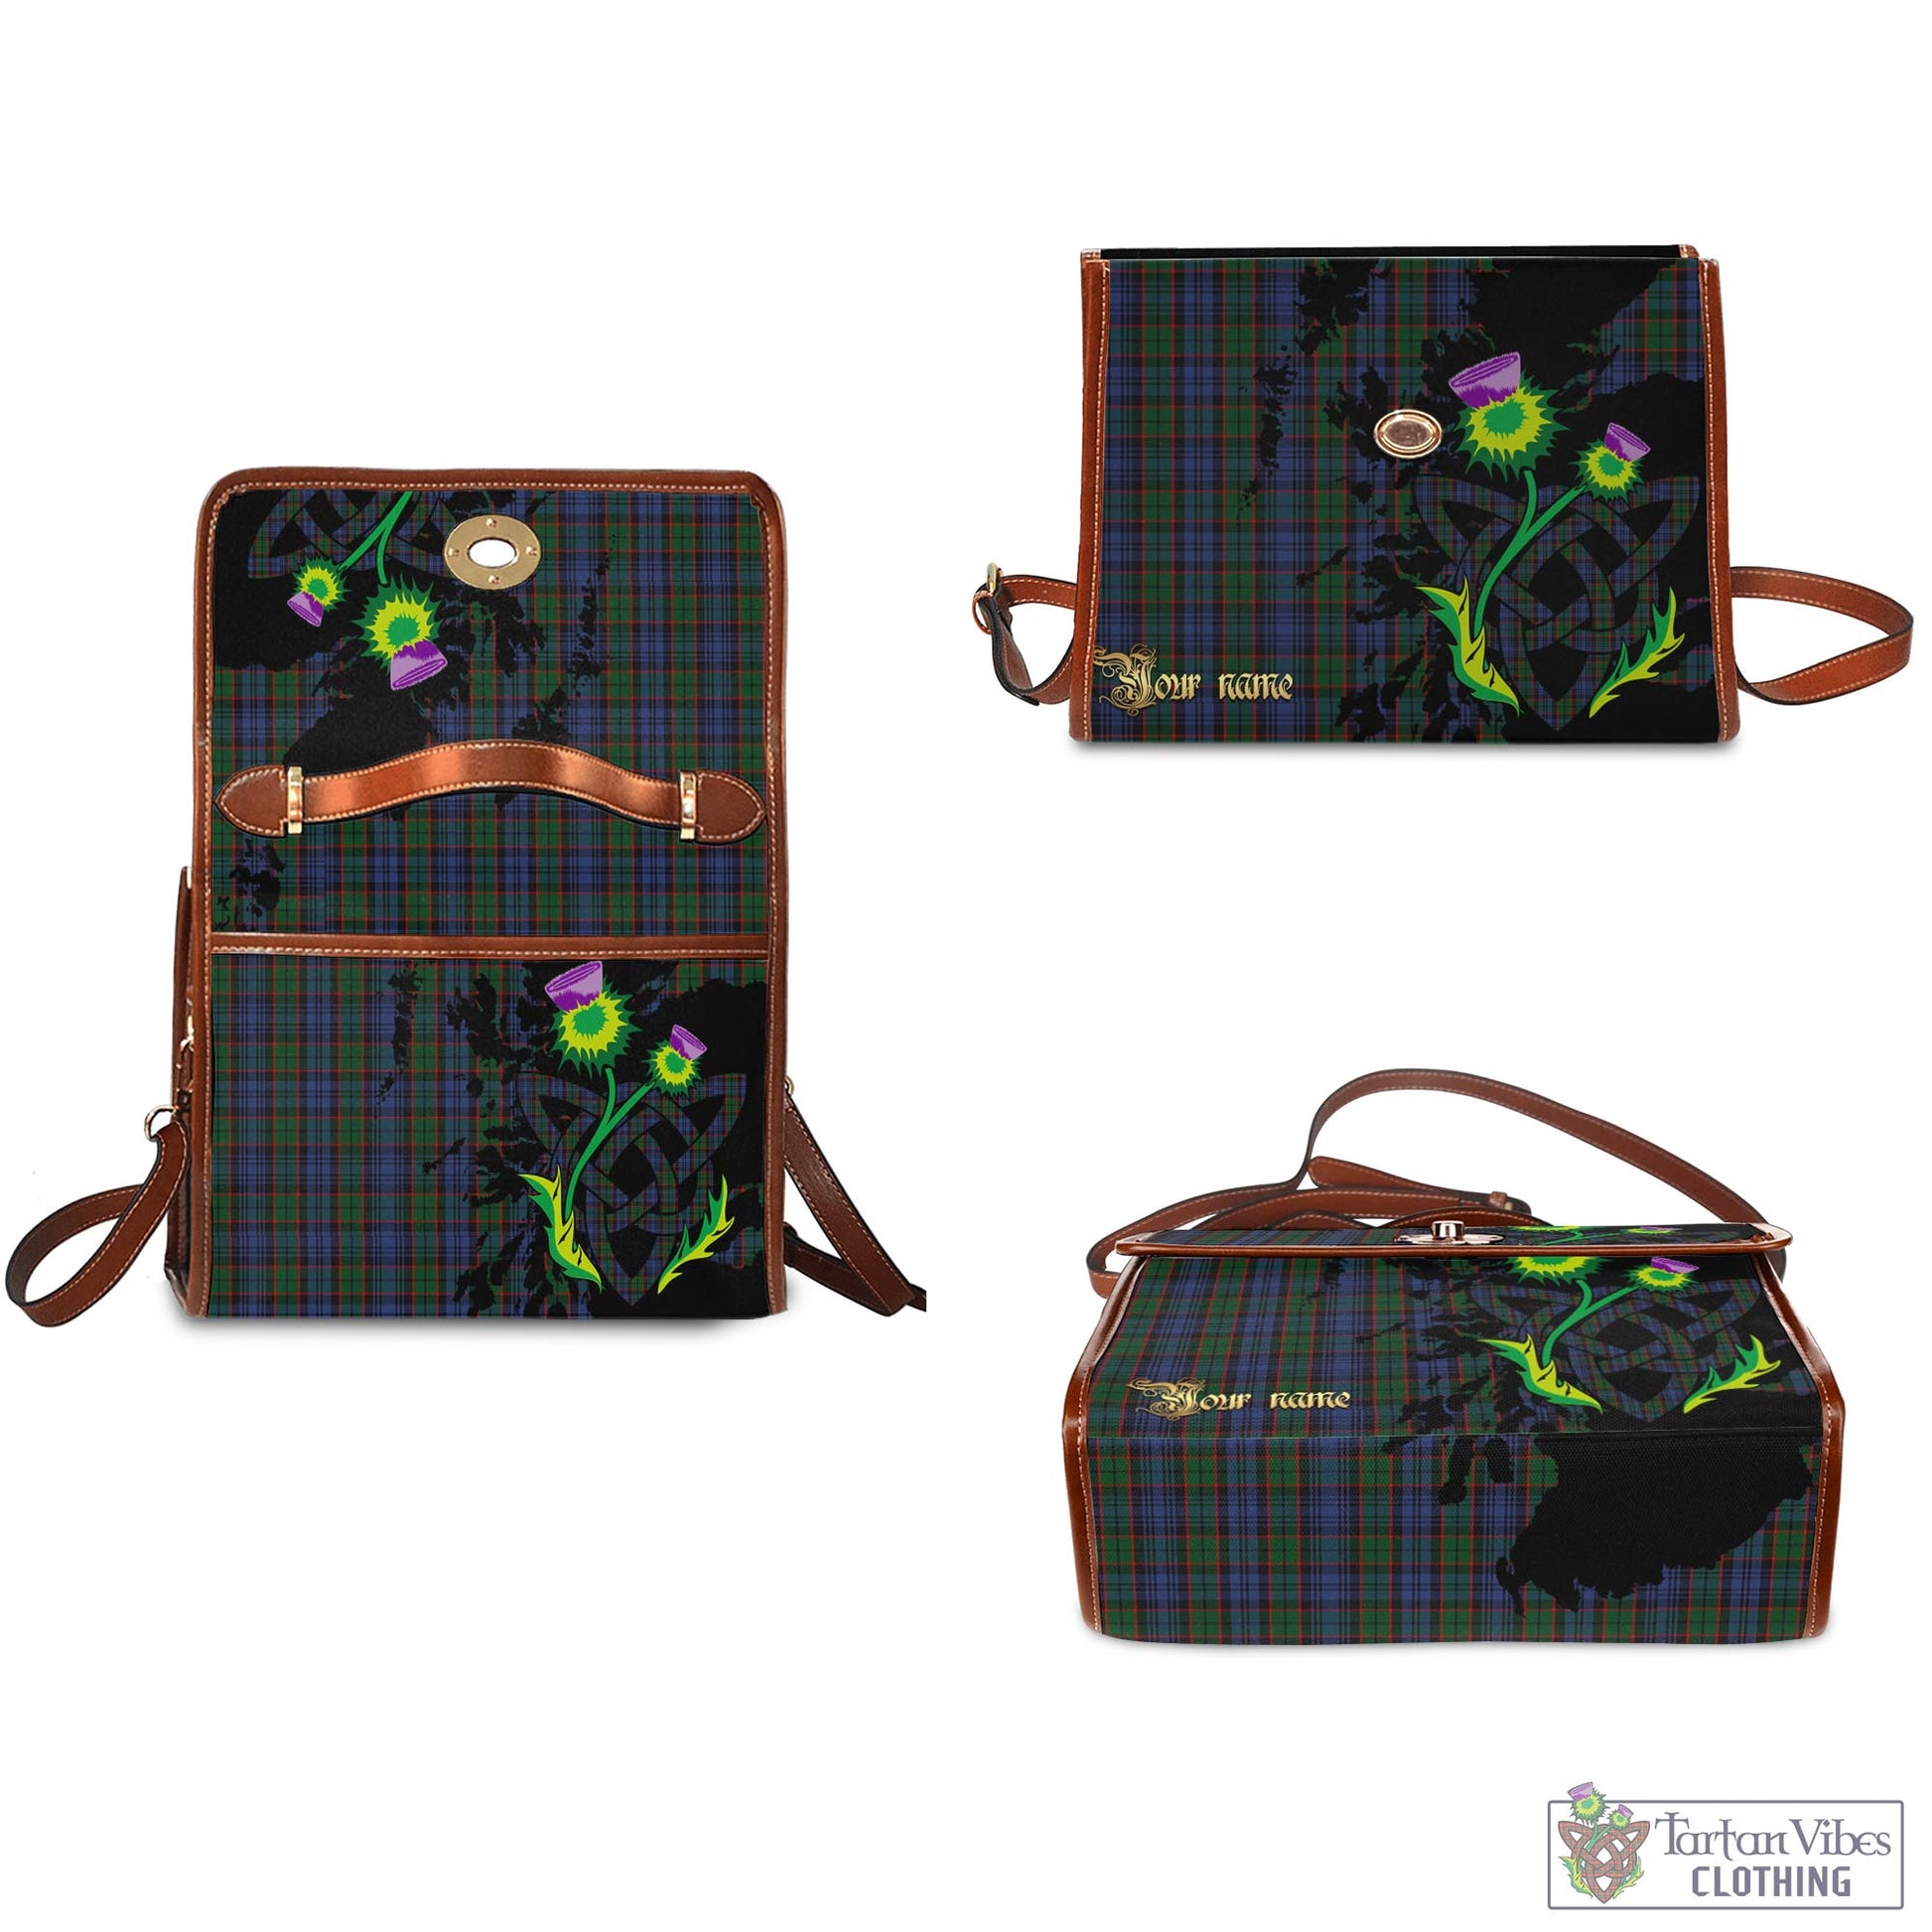 Tartan Vibes Clothing Fletcher Tartan Waterproof Canvas Bag with Scotland Map and Thistle Celtic Accents